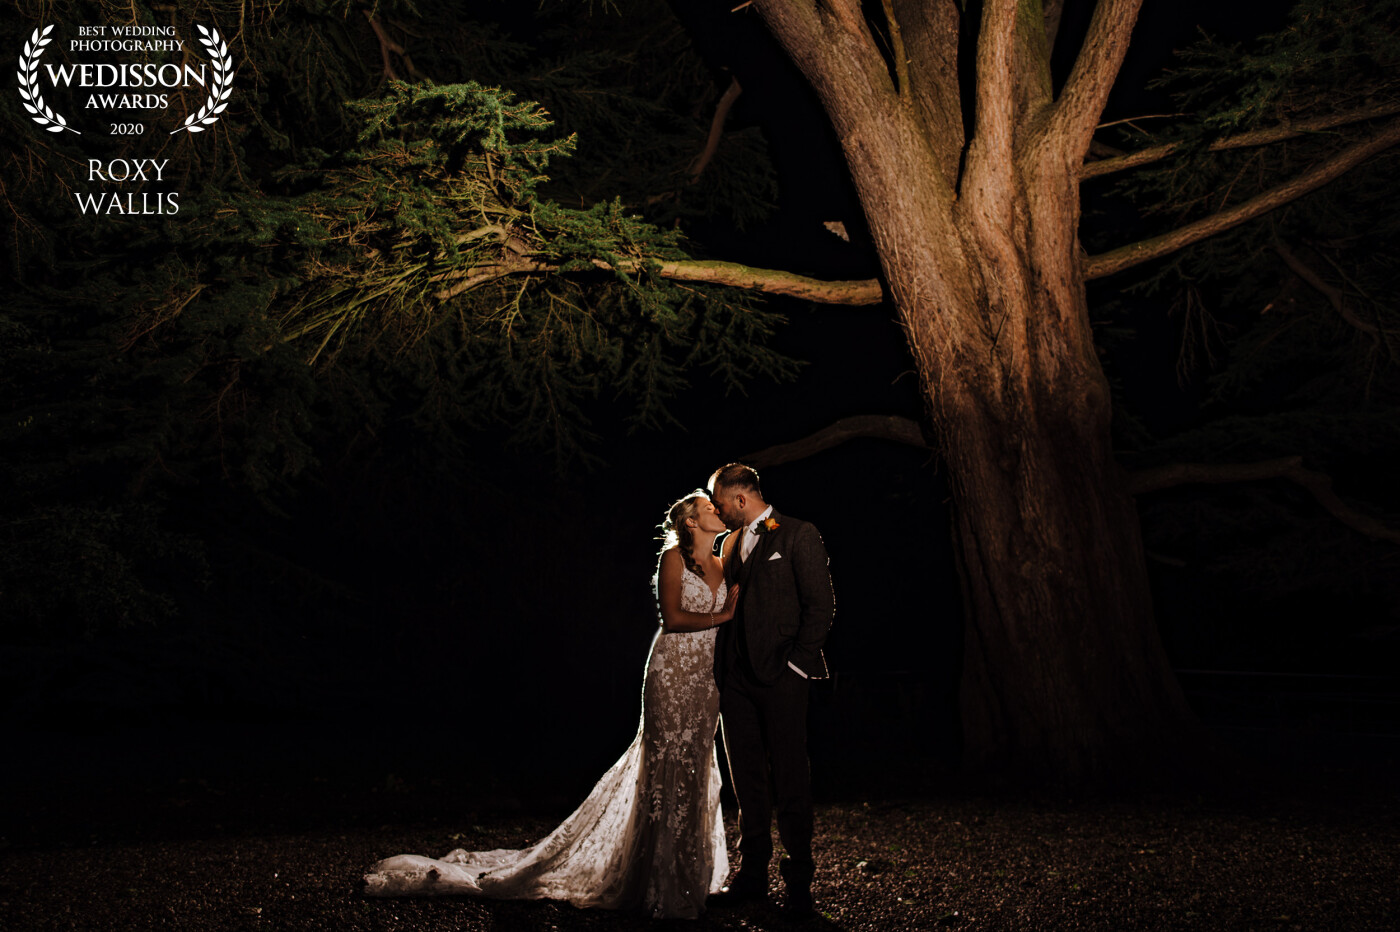 On an exceedingly blowy and cold autumn evening, these two braved the outdoors to get some night portraits and I'm delighted they did as I really wanted to use this glorious and massive tree at Aswarby Rectory. The dress made for a fabulous opportunity to play with some backlighting too! Proof overall that even during a global pandemic amazing wedding memories can be made.